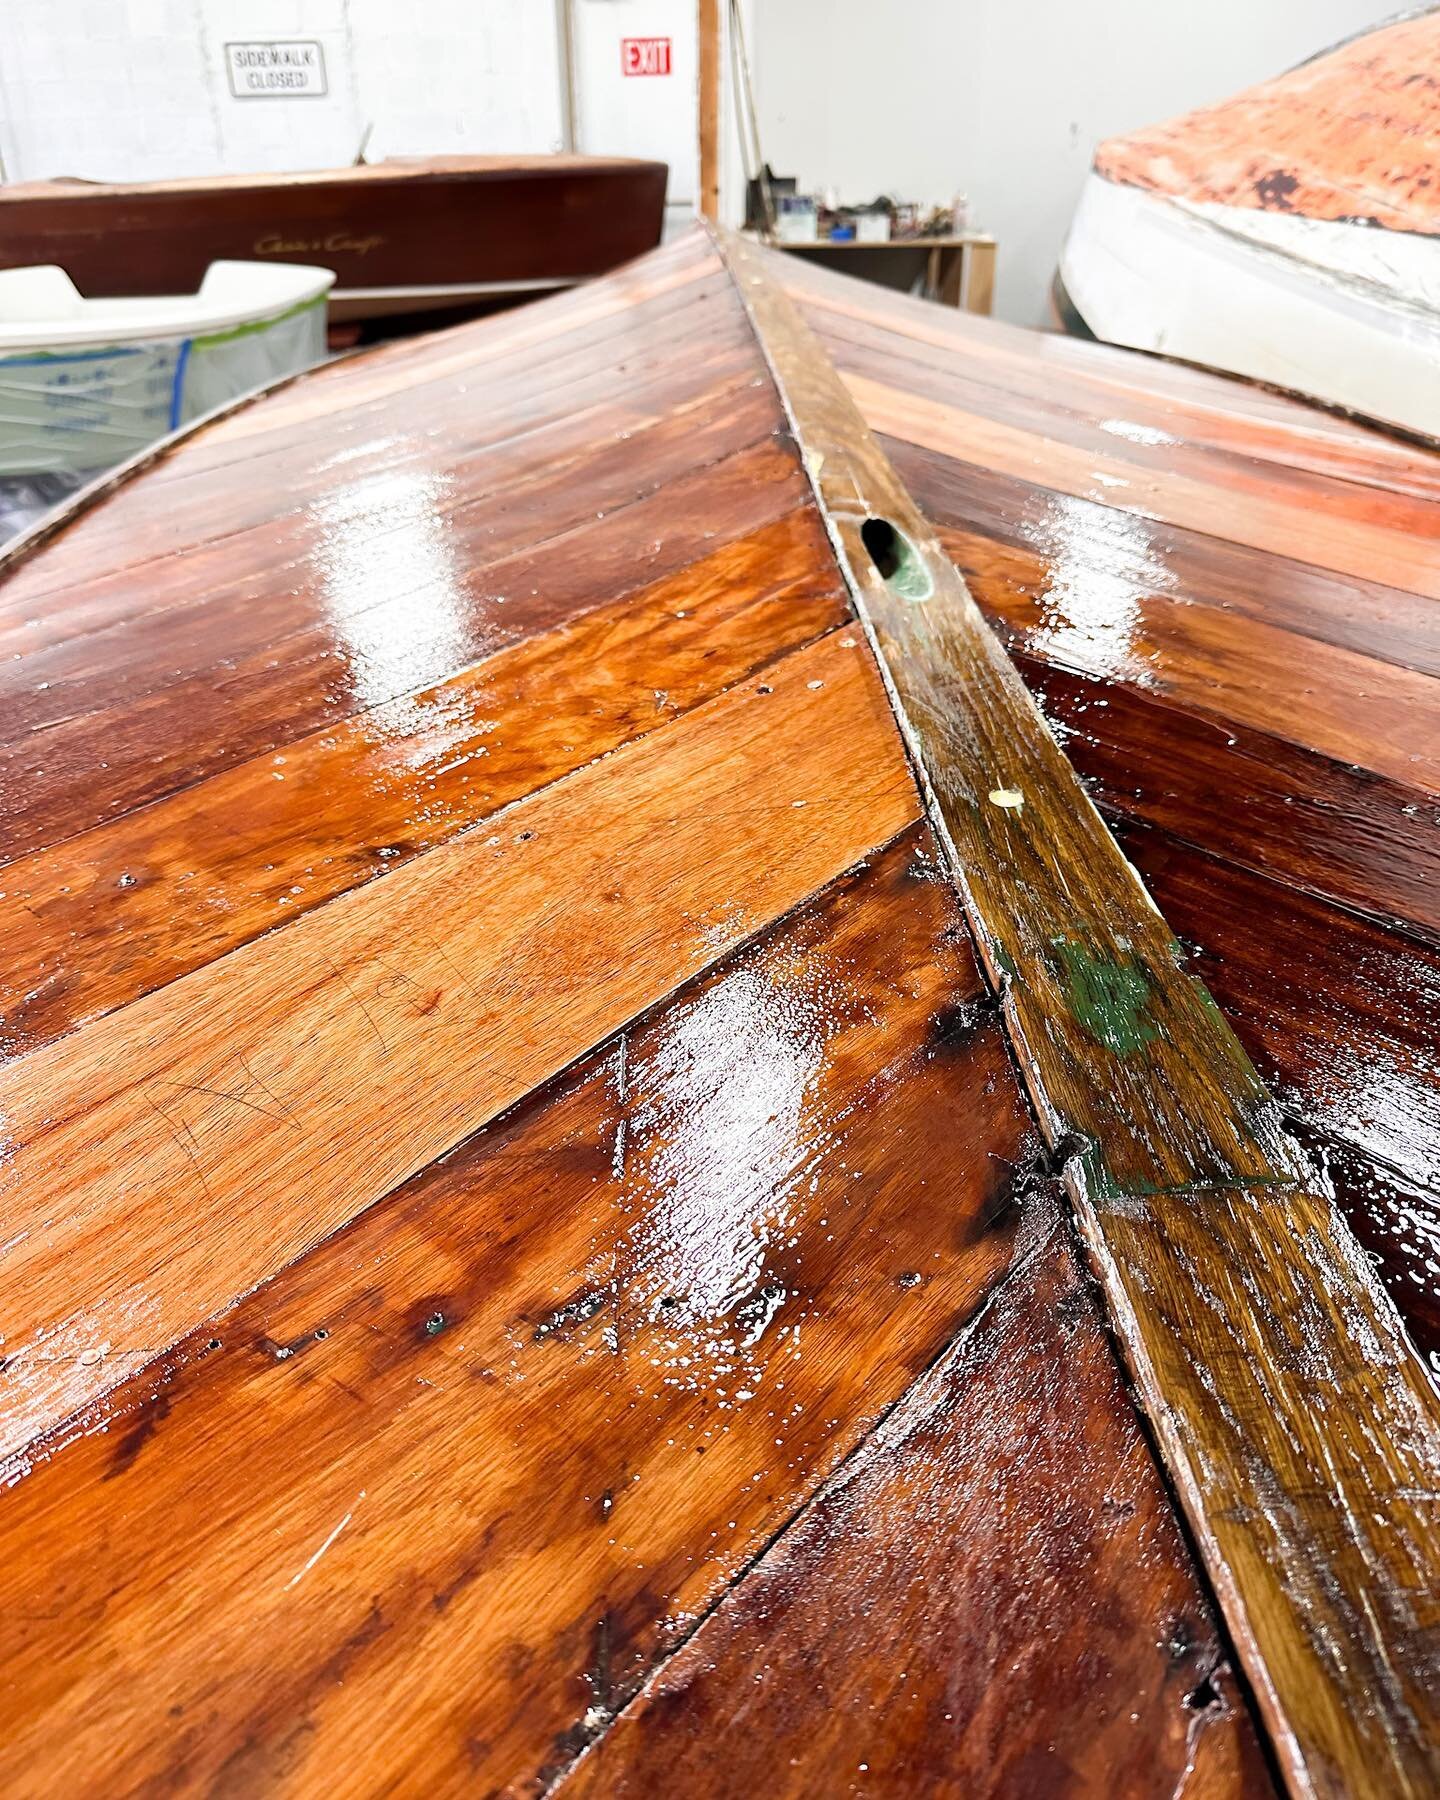 A fresh coat of @systemthree S-1 clear penetrating epoxy sealer to protect the bottom of the Rocket. Couldn&rsquo;t be easier!
⠀
⠀
⠀
⠀
#woodenboat #woodenboats #boats #woodenboatbuilding #woodenboatshop #boating #boatbuilding #classicboat #chriscraft